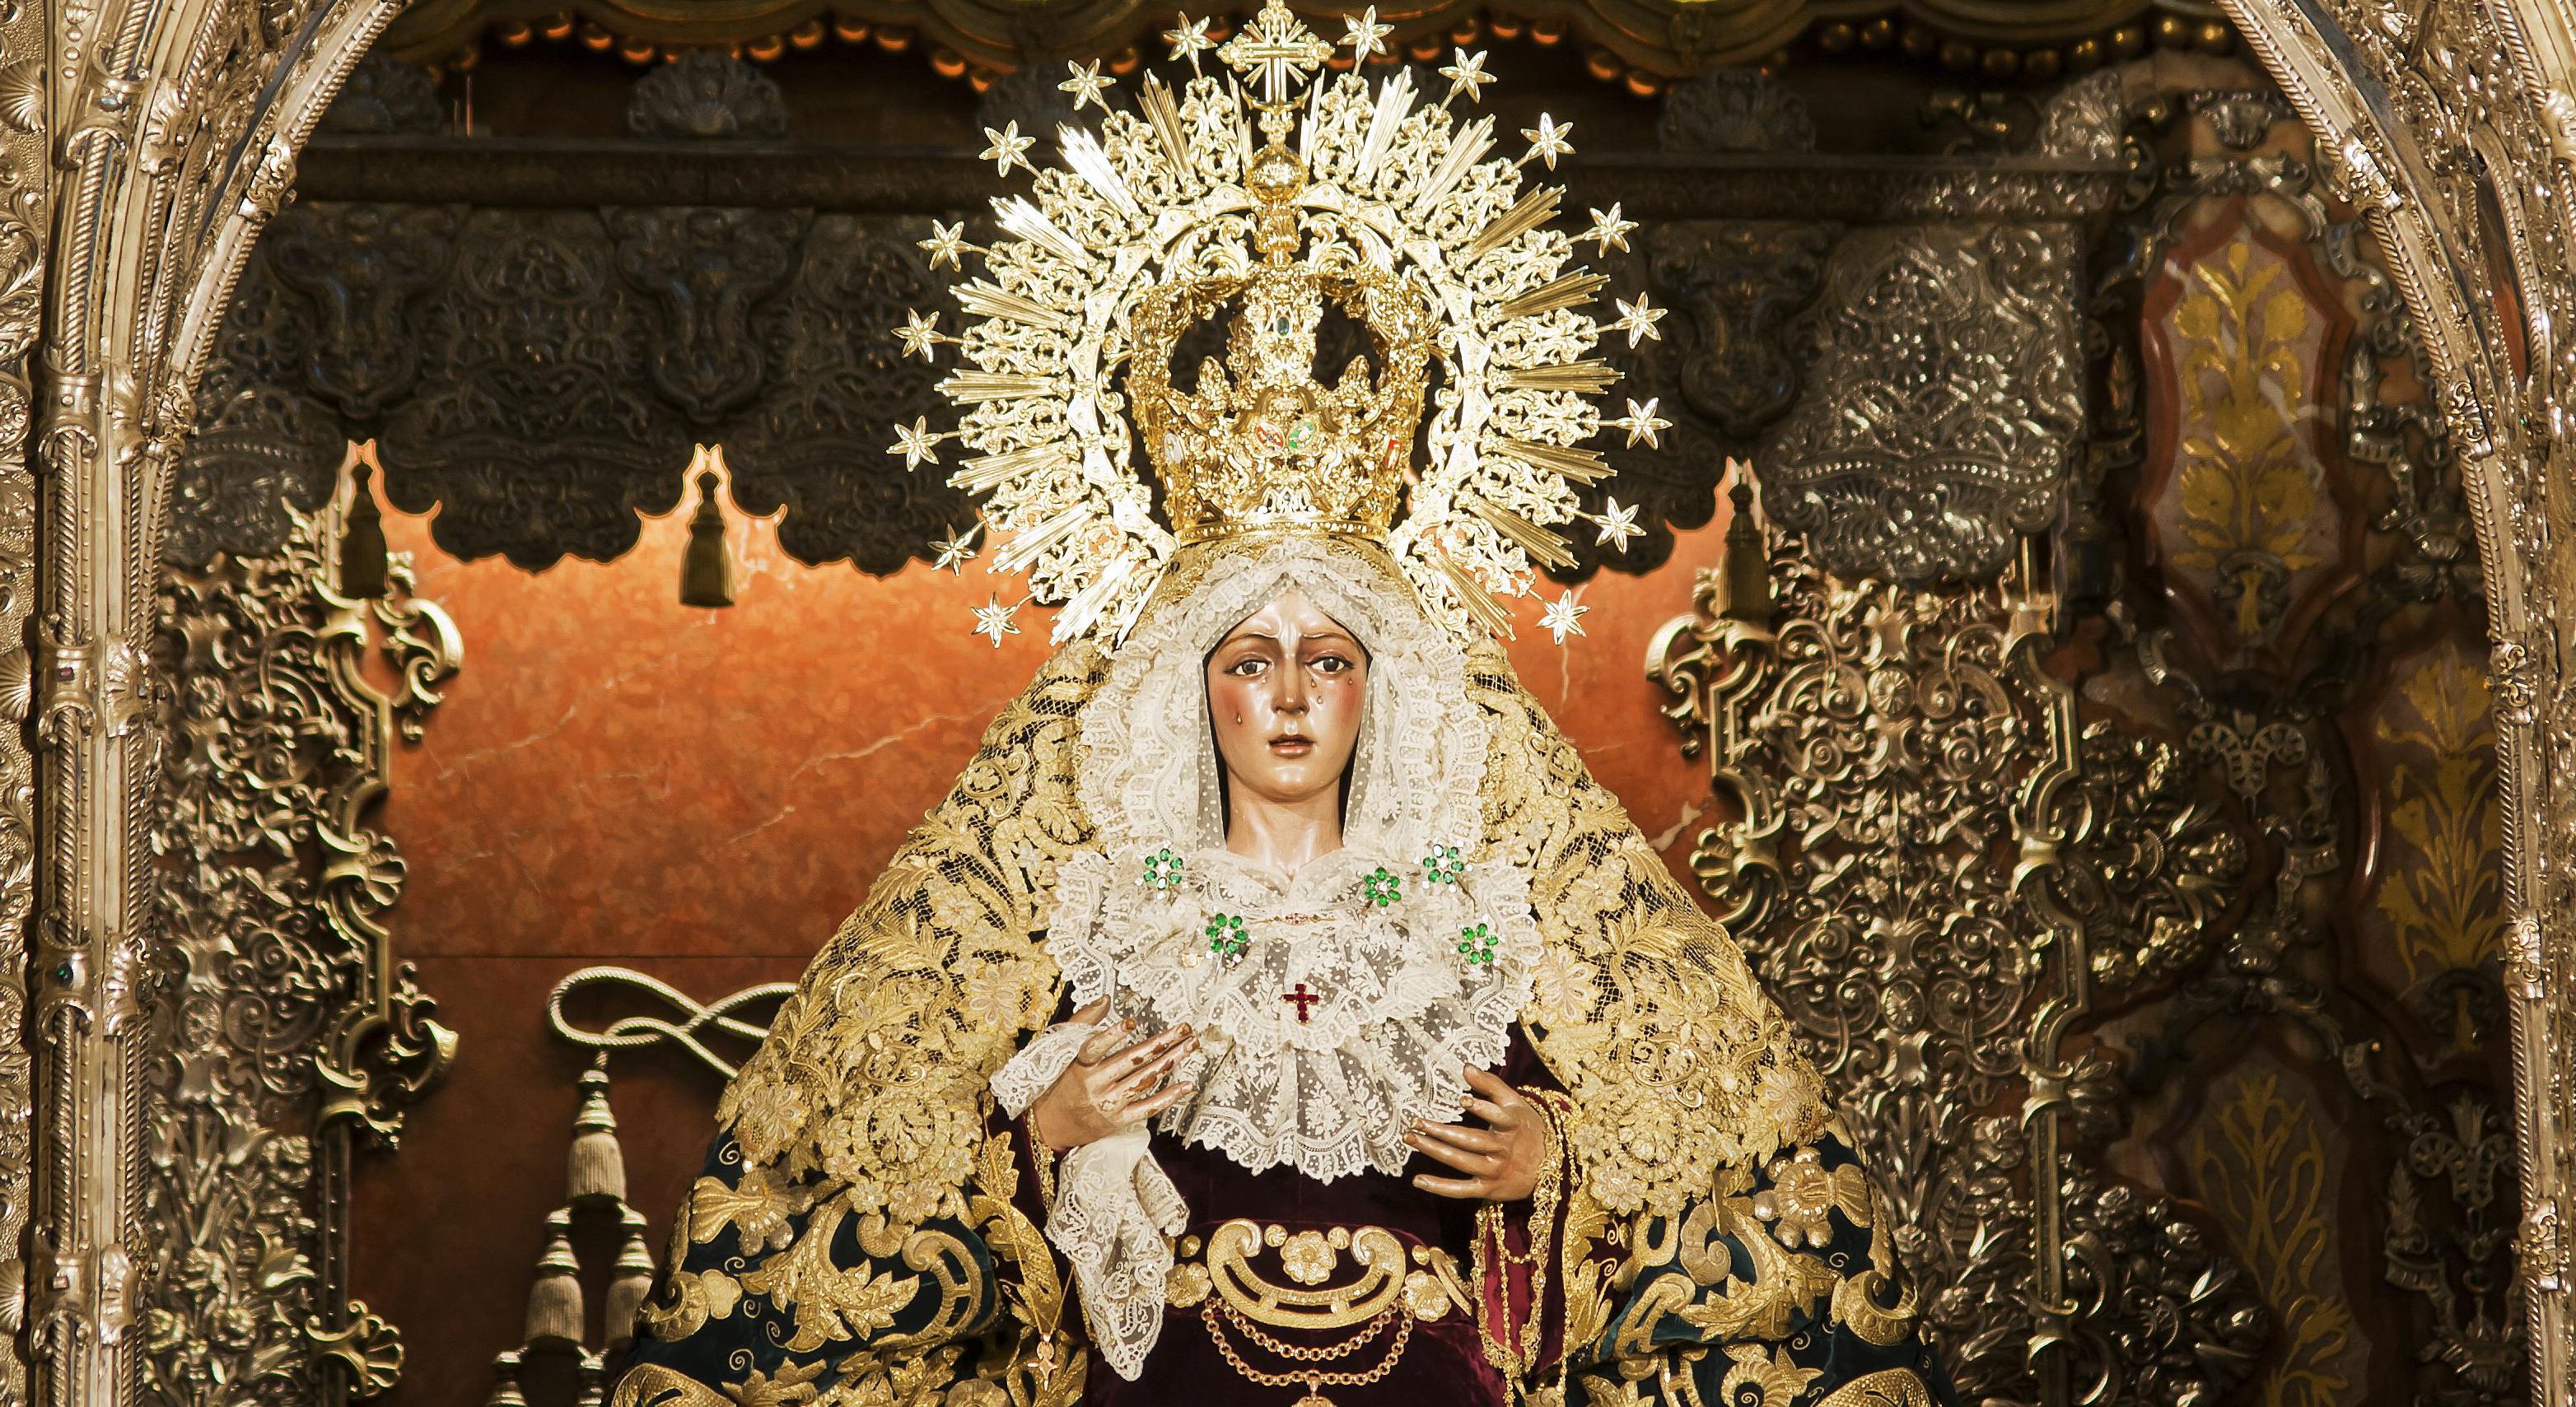 Our-Lady-of-Hope-Macarena-Seville-Spain-shutterstock_88389781